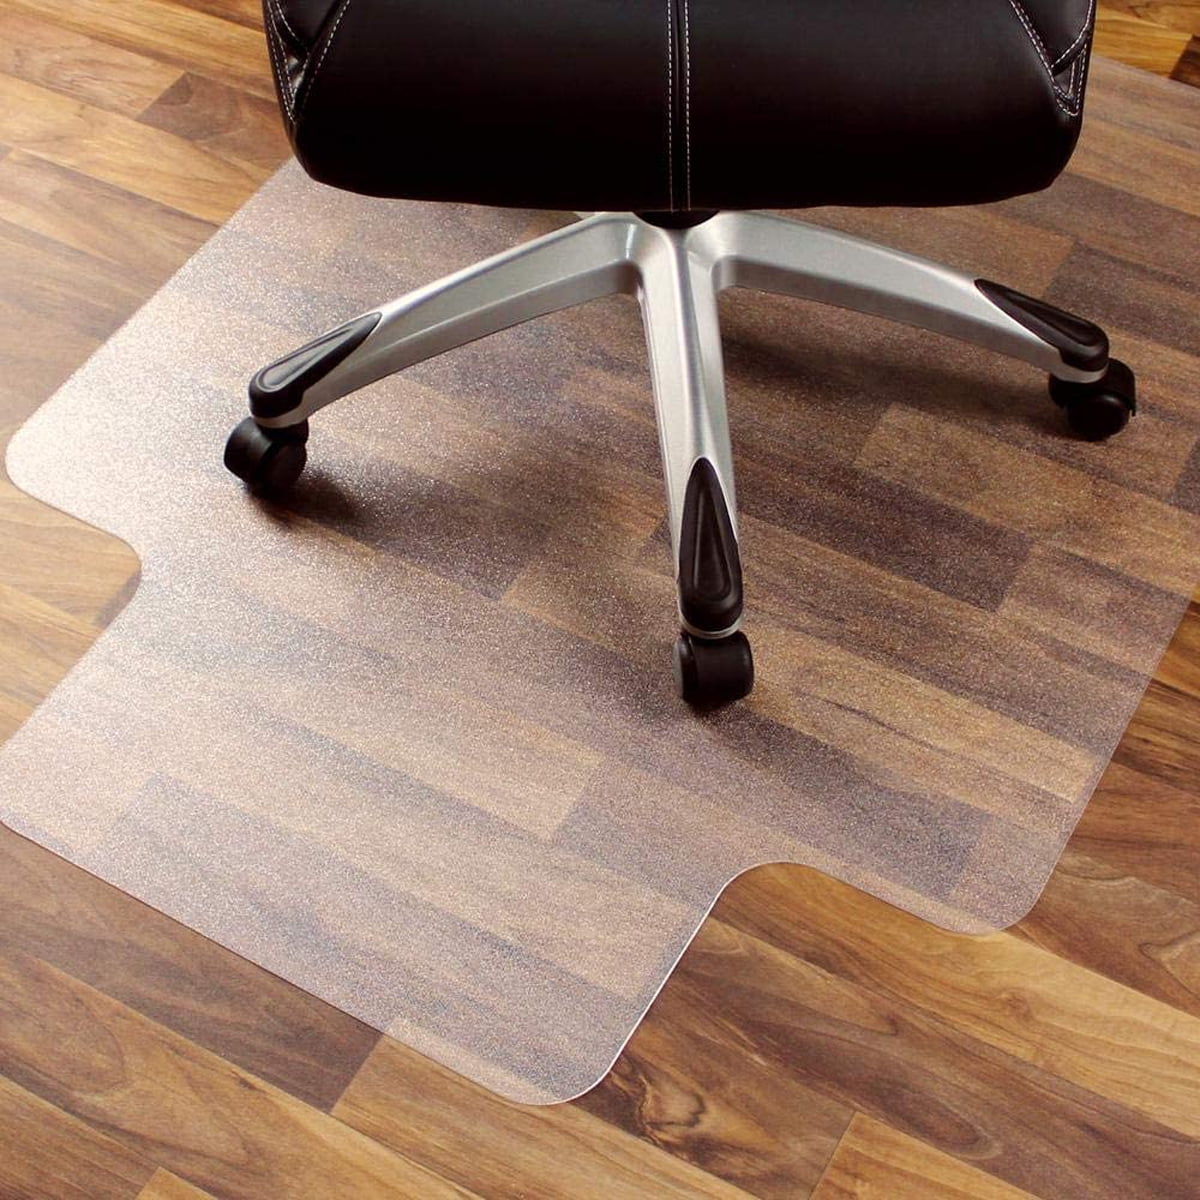 Office Chair Mats for Carpeted Floors, Polycarbonate Chair